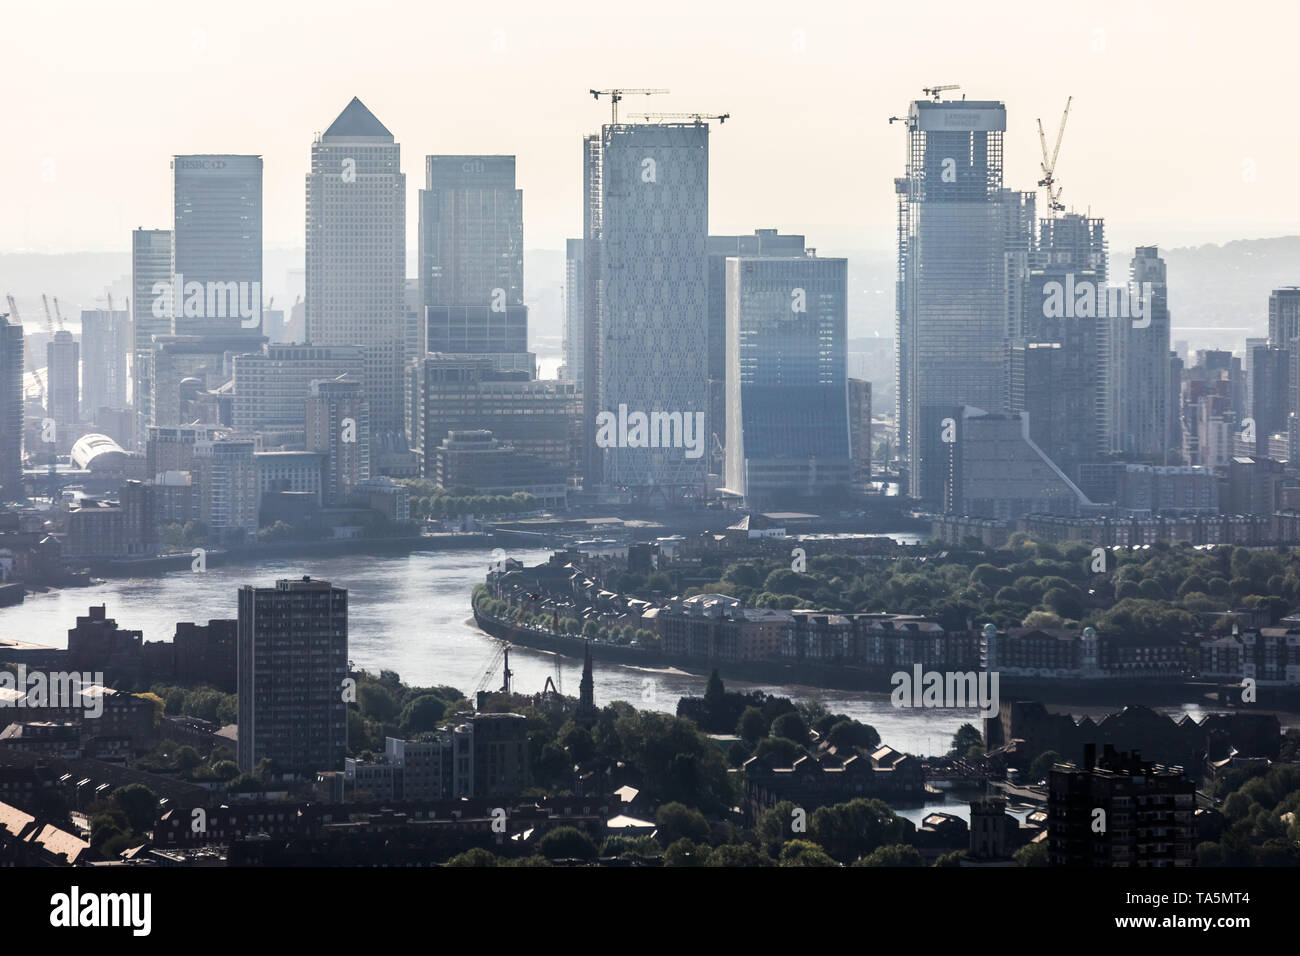 UK Weather: Morning light over Canary Wharf business park buildings in east London. Stock Photo